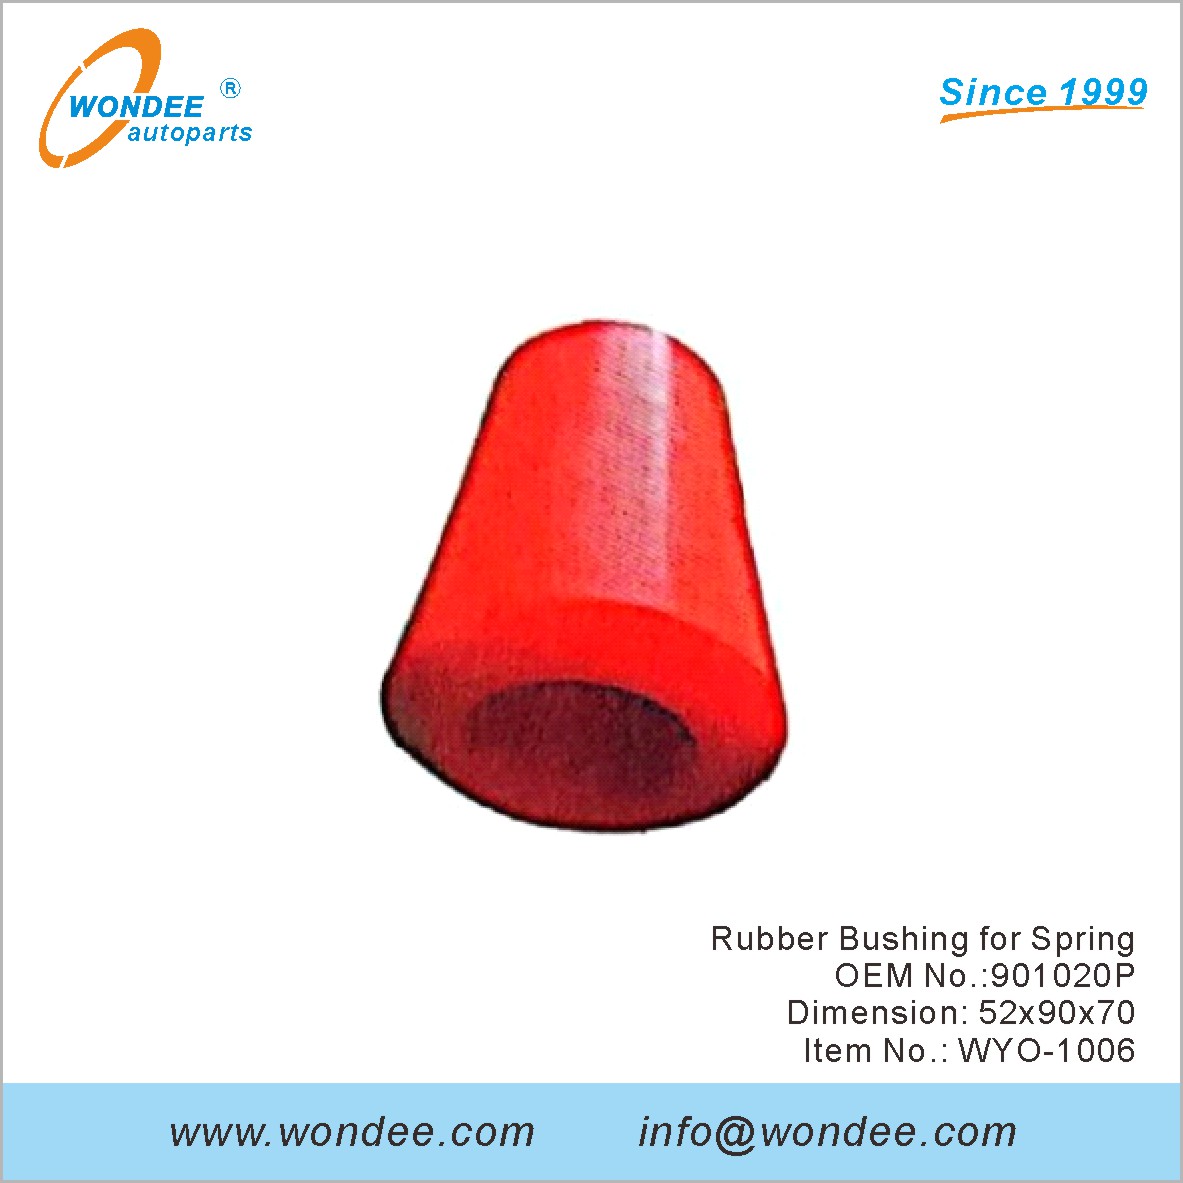 Rubber Bushing for Spring OEM 901020P for Volvo from WONDEE